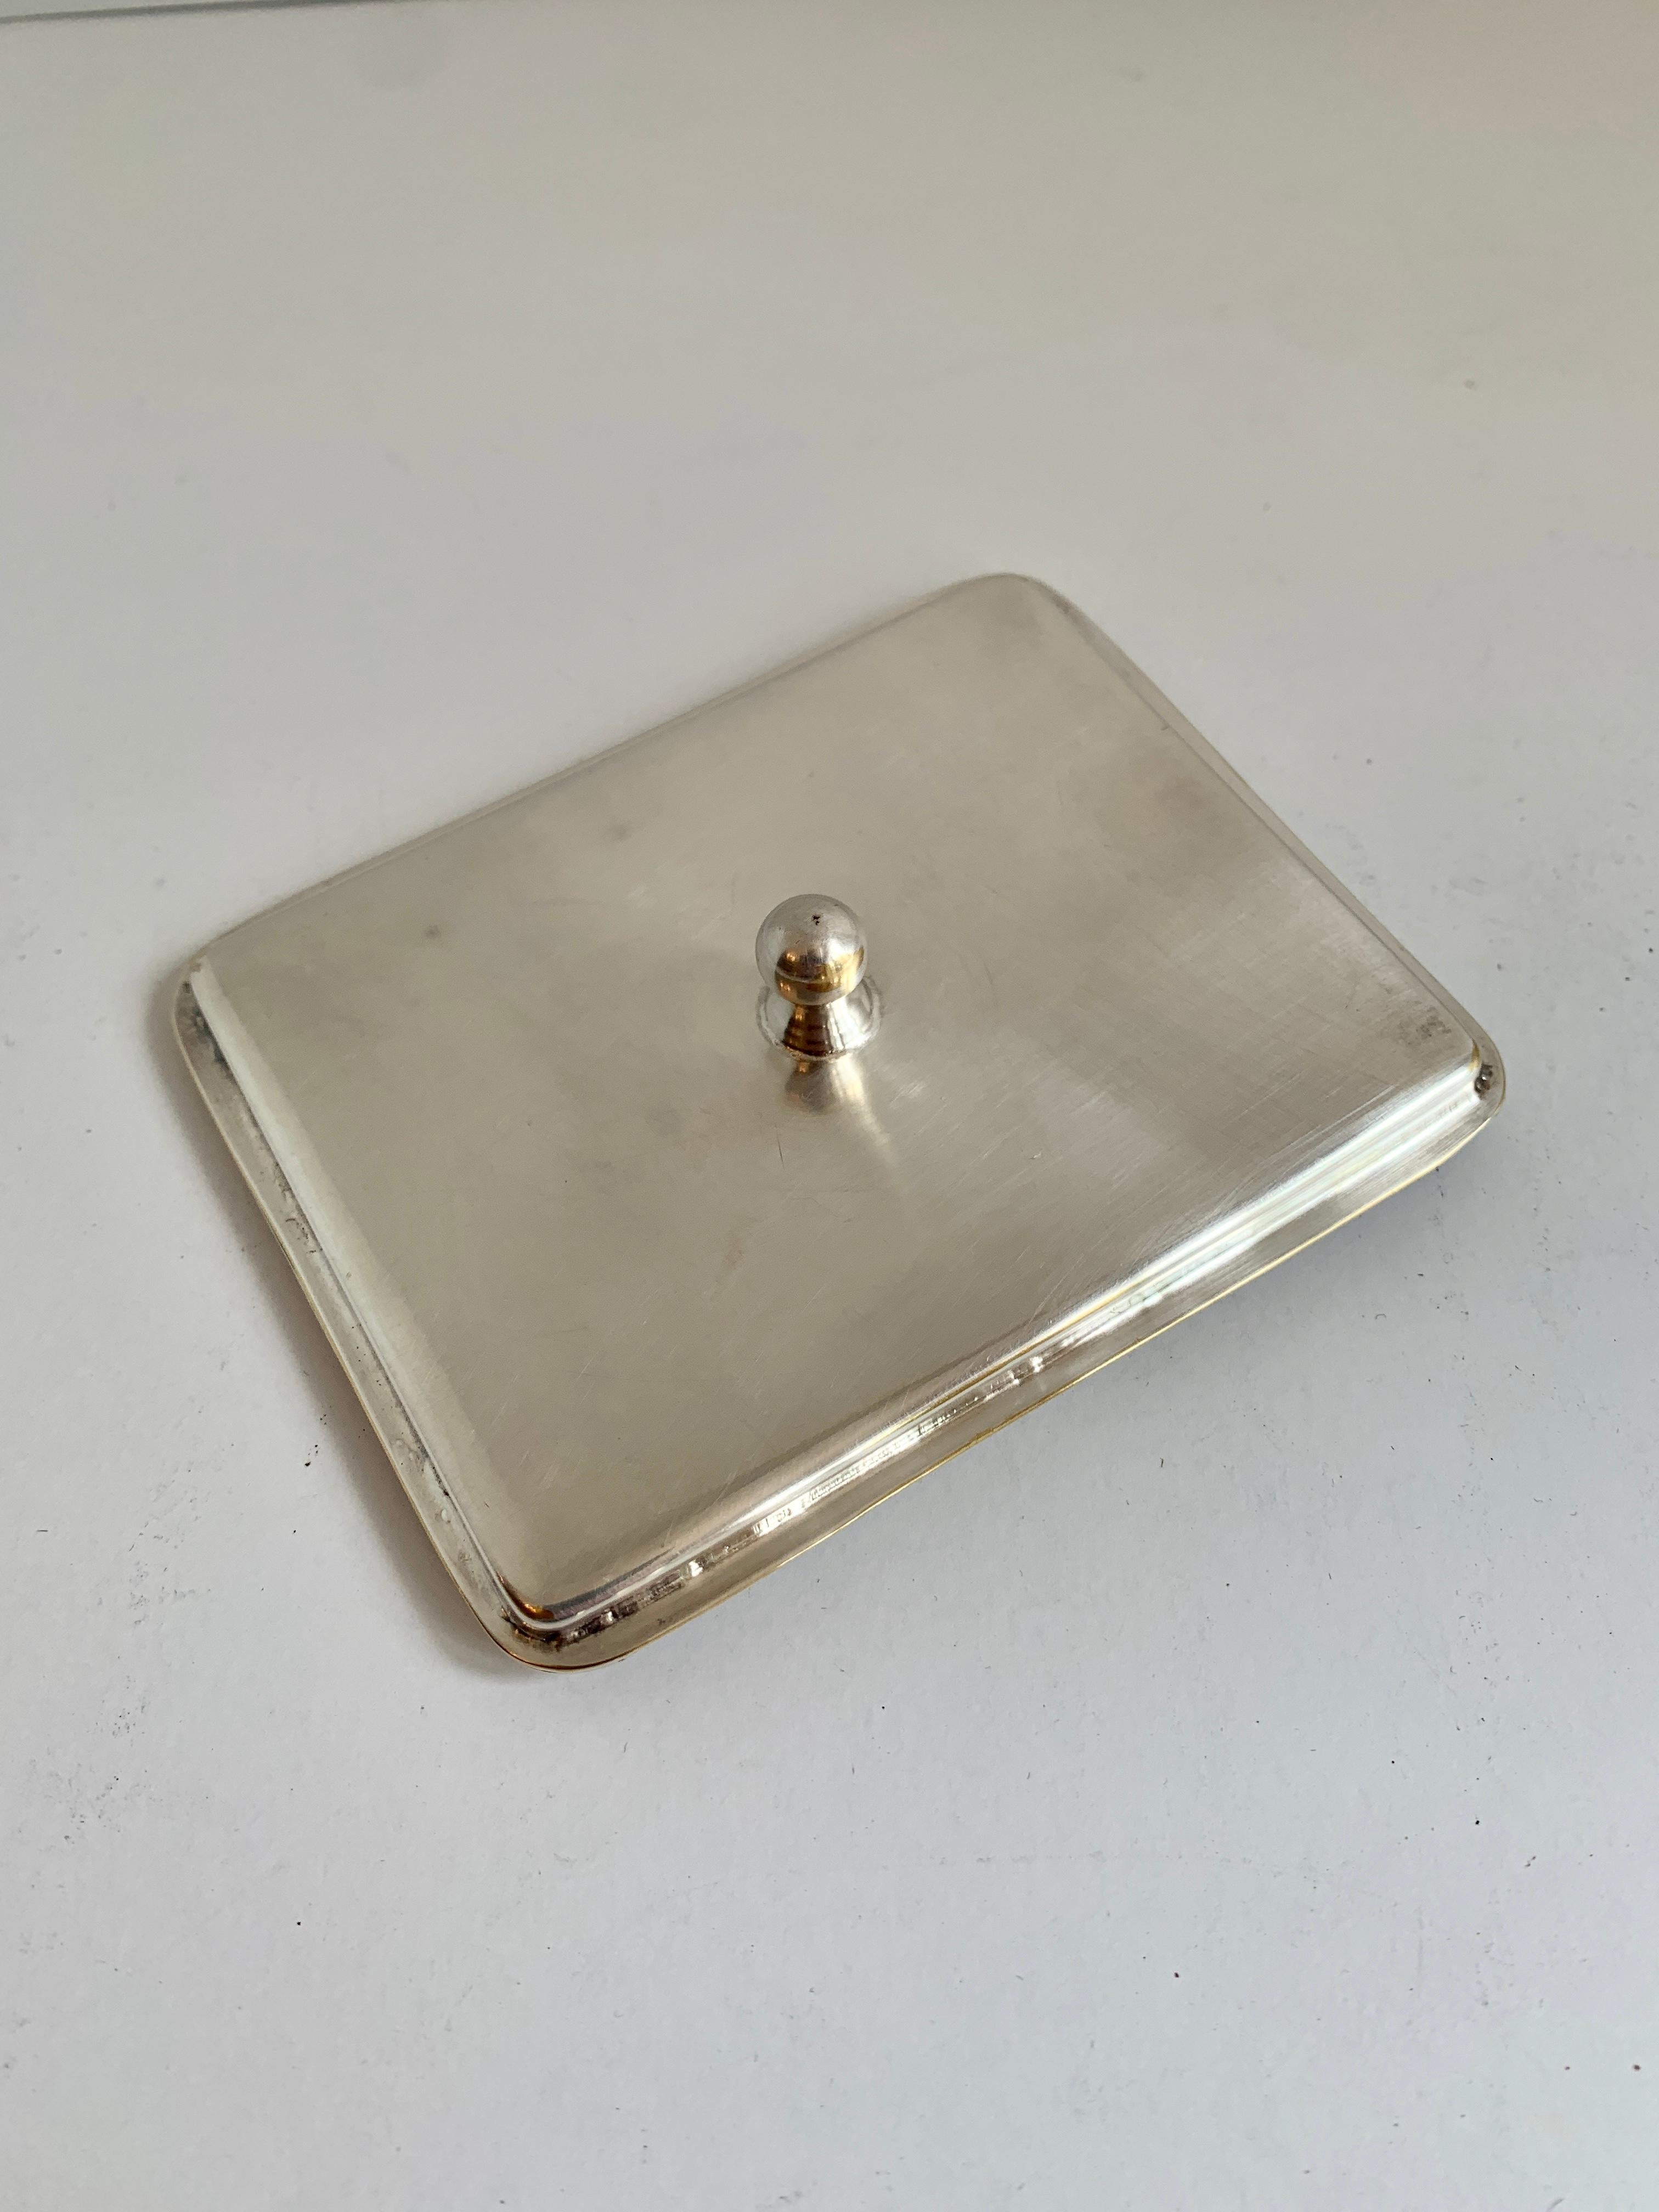 This very slim and uniquely designed card holder looks to have been for, perhaps, signing a bill or statement at a hotel or fine club - the trim is lovely. Silver plated and made in Argentina.